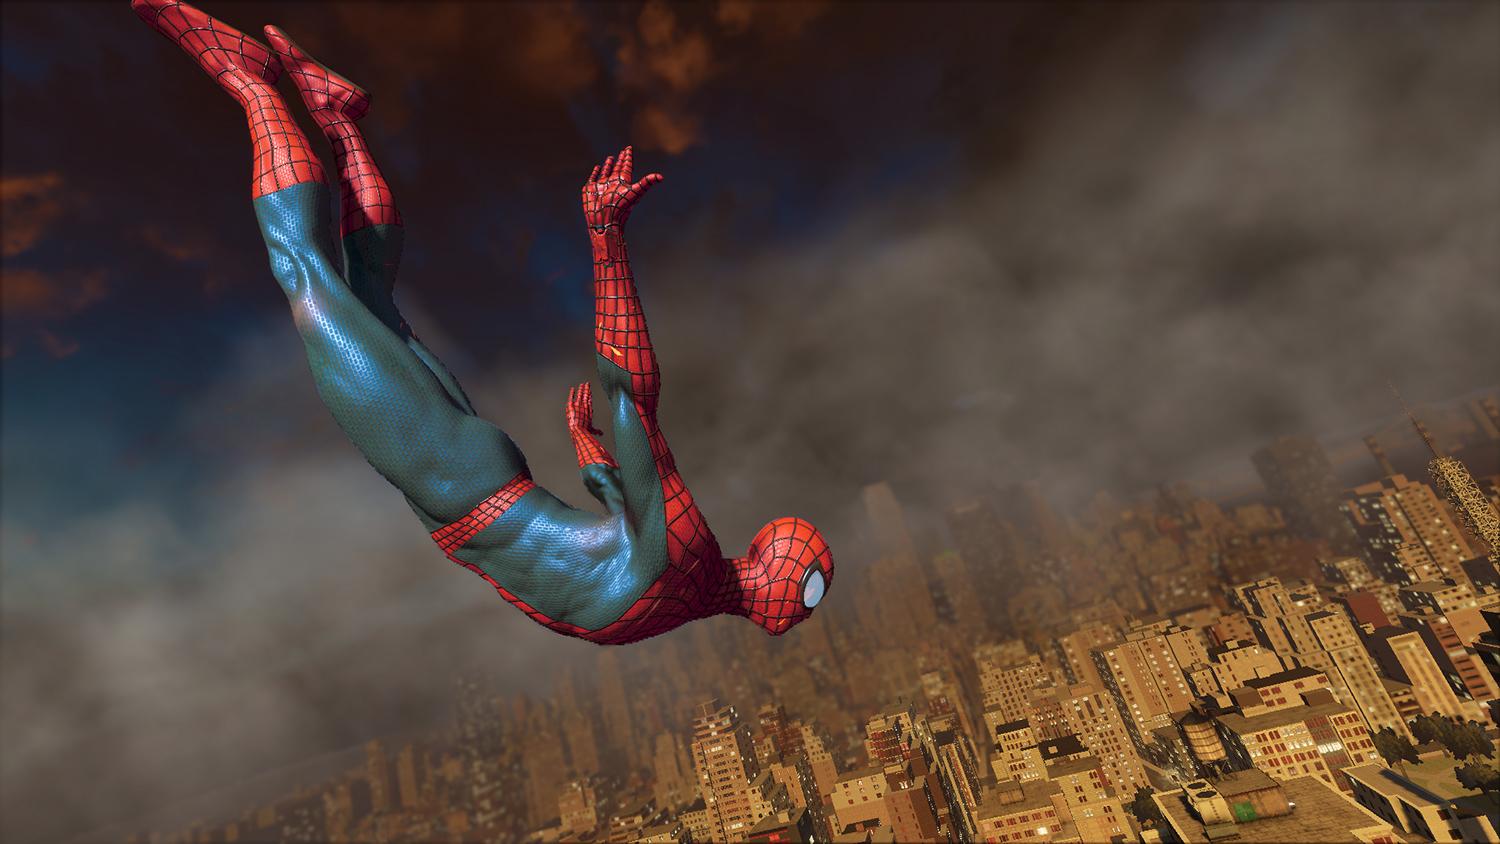 The Amazing Spider-Man 2 Reviews, Pros and Cons